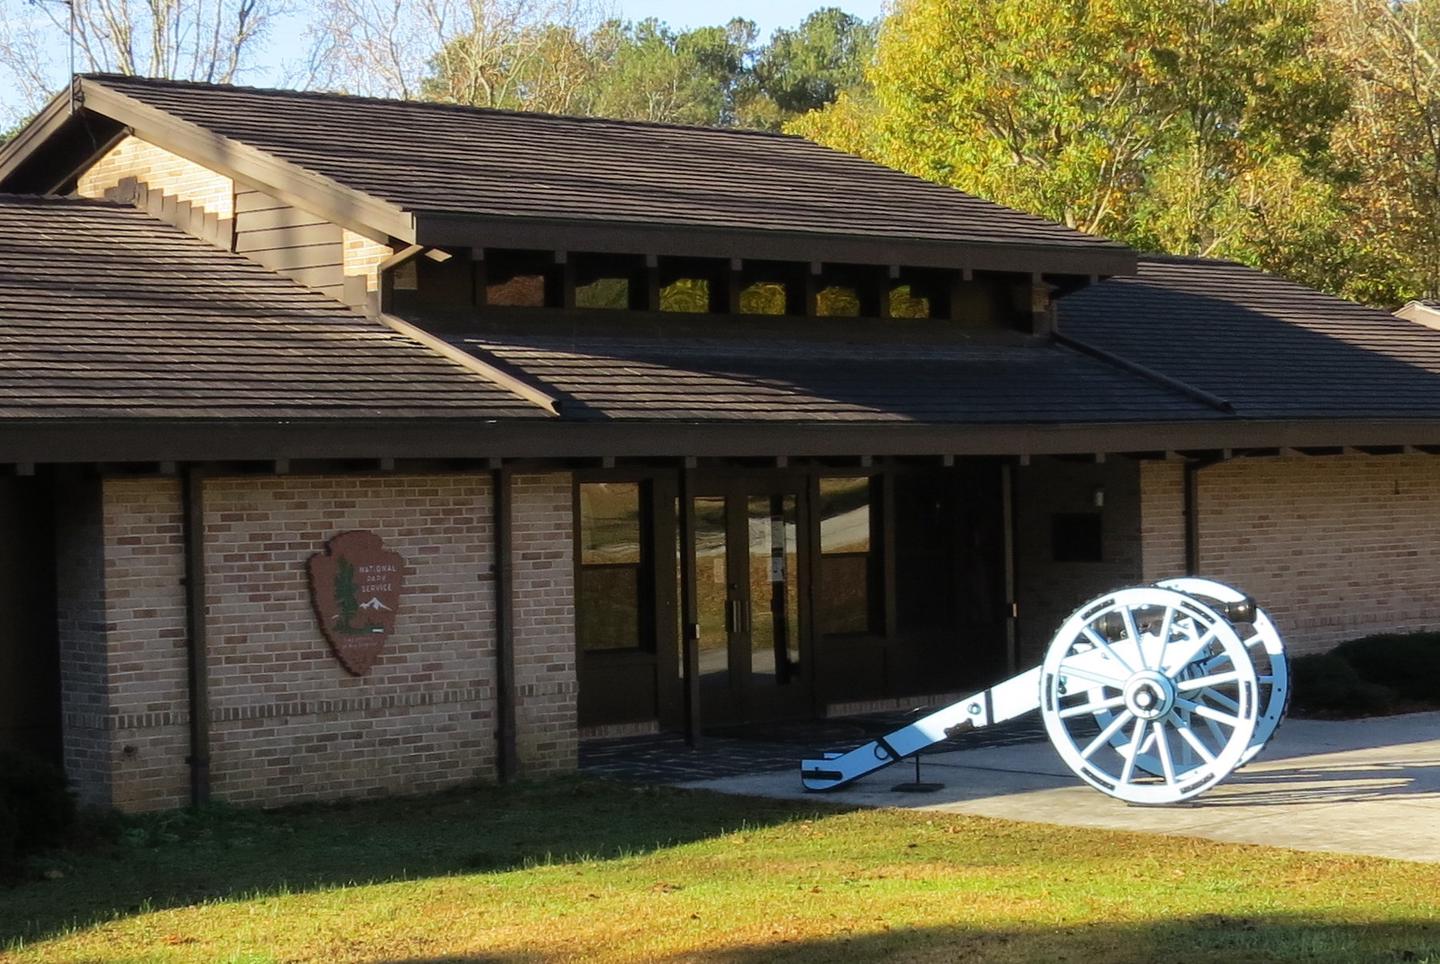 Visitor CenterThe Horseshoe Bend NMP's Mission 66 Visitor Center with 1812 era 3-pounder cannon.